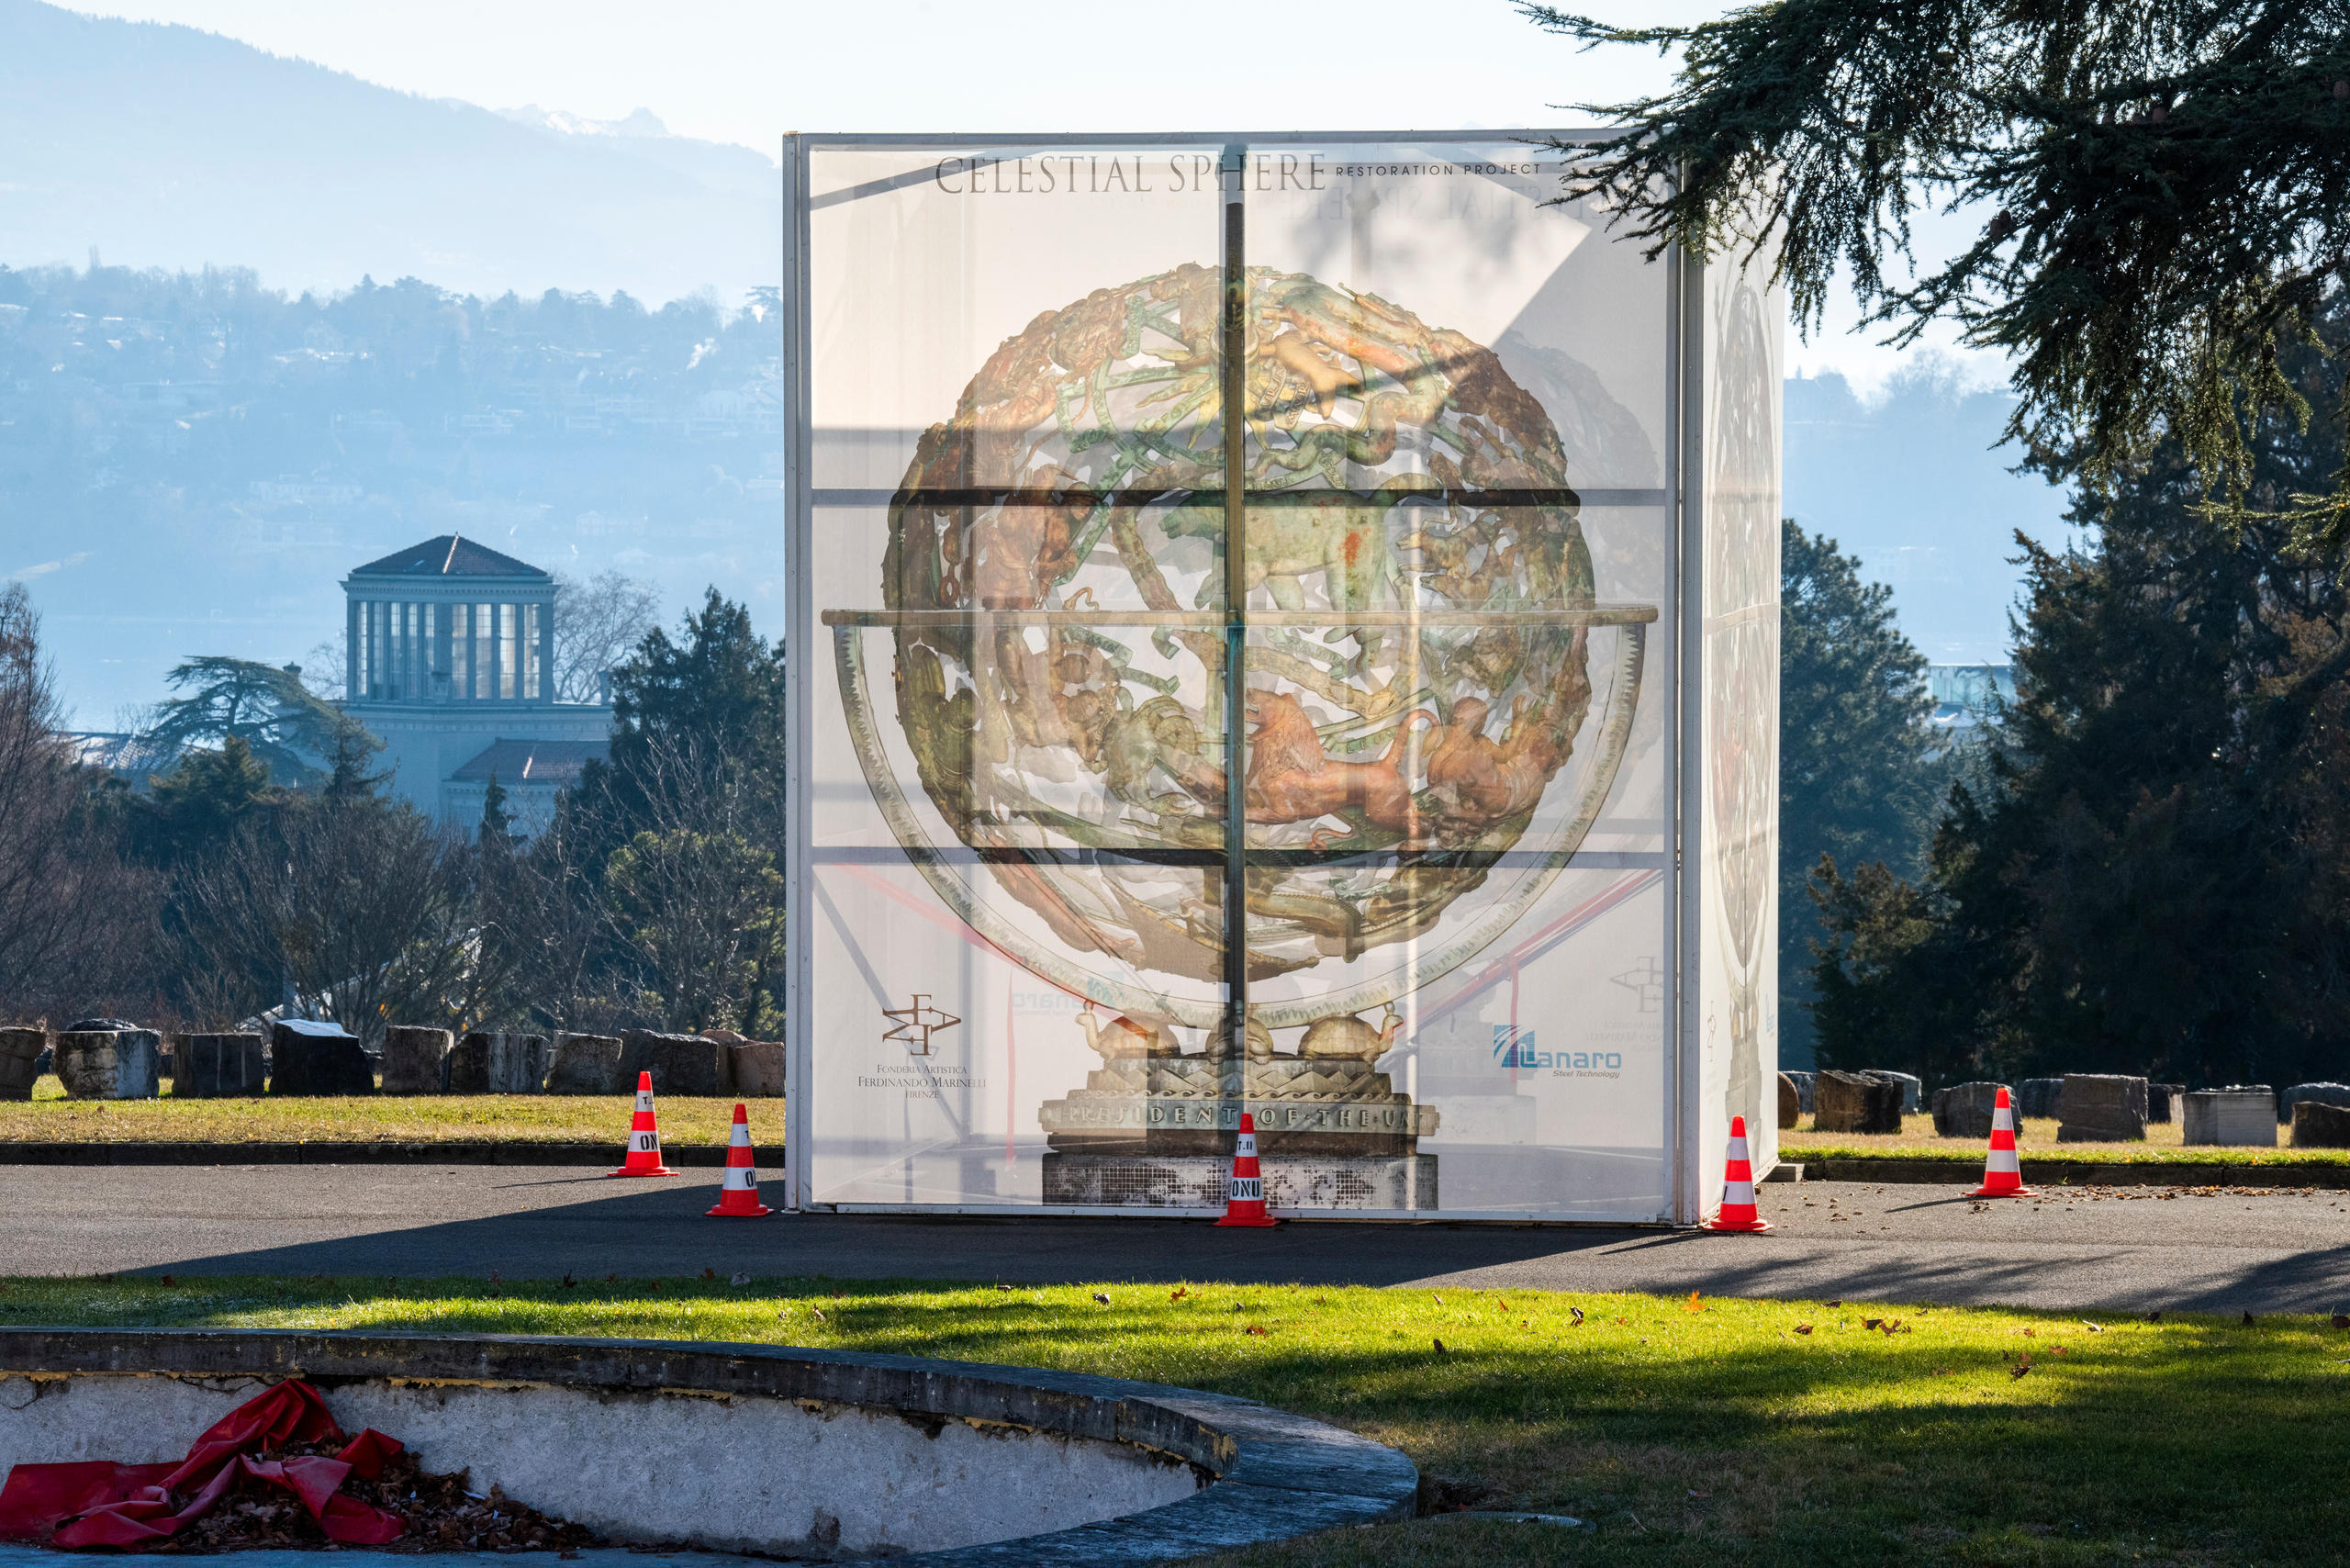 A life-size image of the Celestial Sphere outside the Palais des Nations.